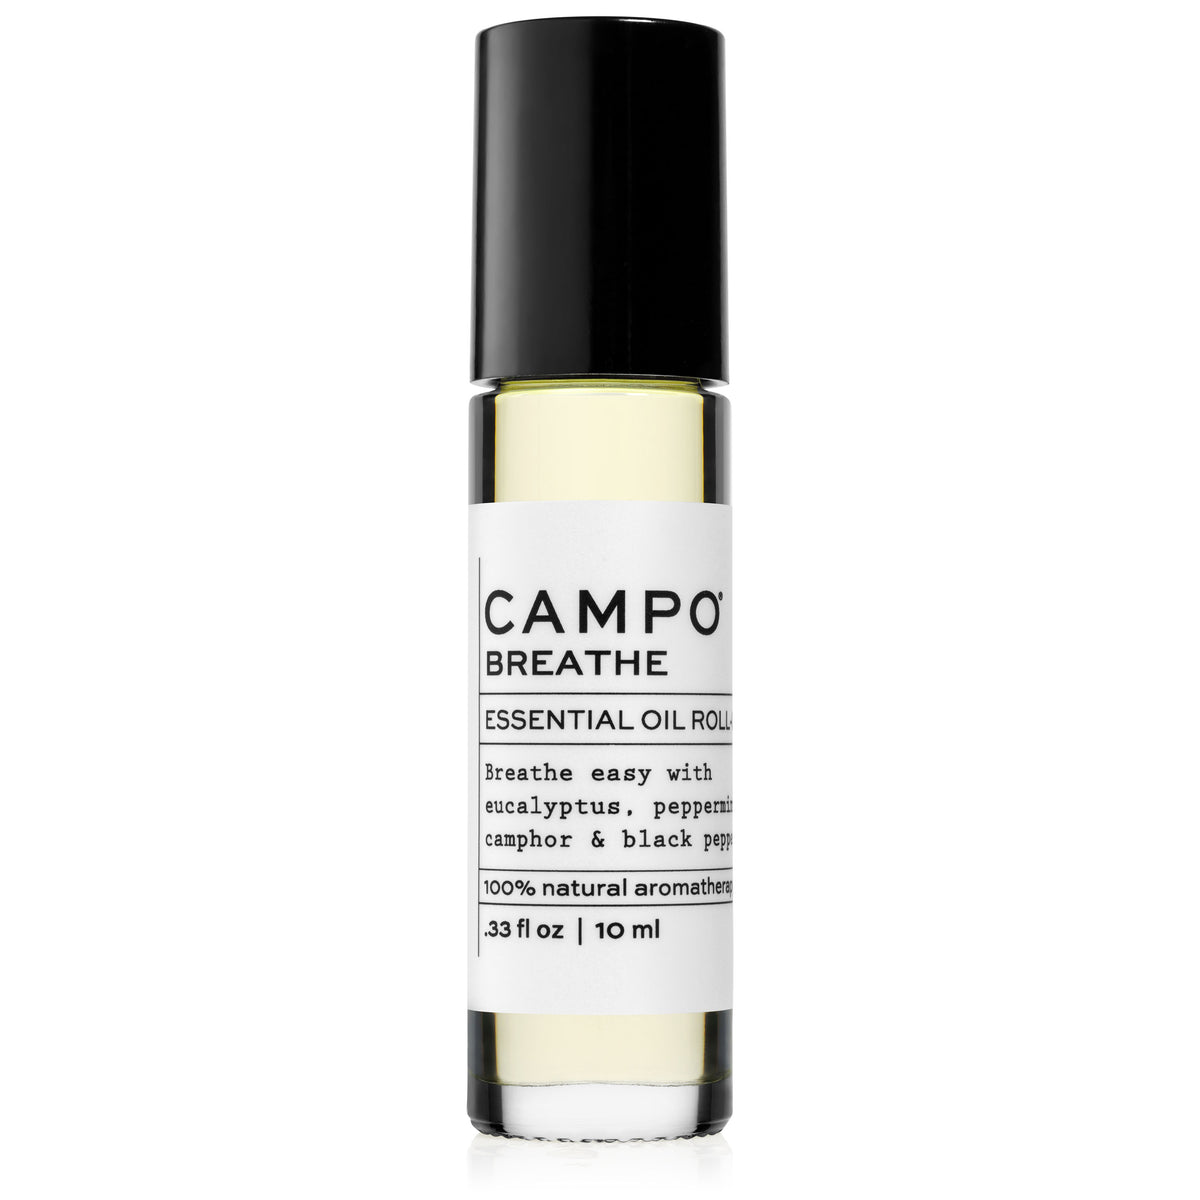 CAMPO Beauty 10 ml BREATHE Blend Essential Oil Roll-On. Breathe easy with this essential oil blend of eucalyptus, peppermint, camphor &amp; black pepper. Blended with 100% natural beauty carrier oils. Jet set and ready to roll. 